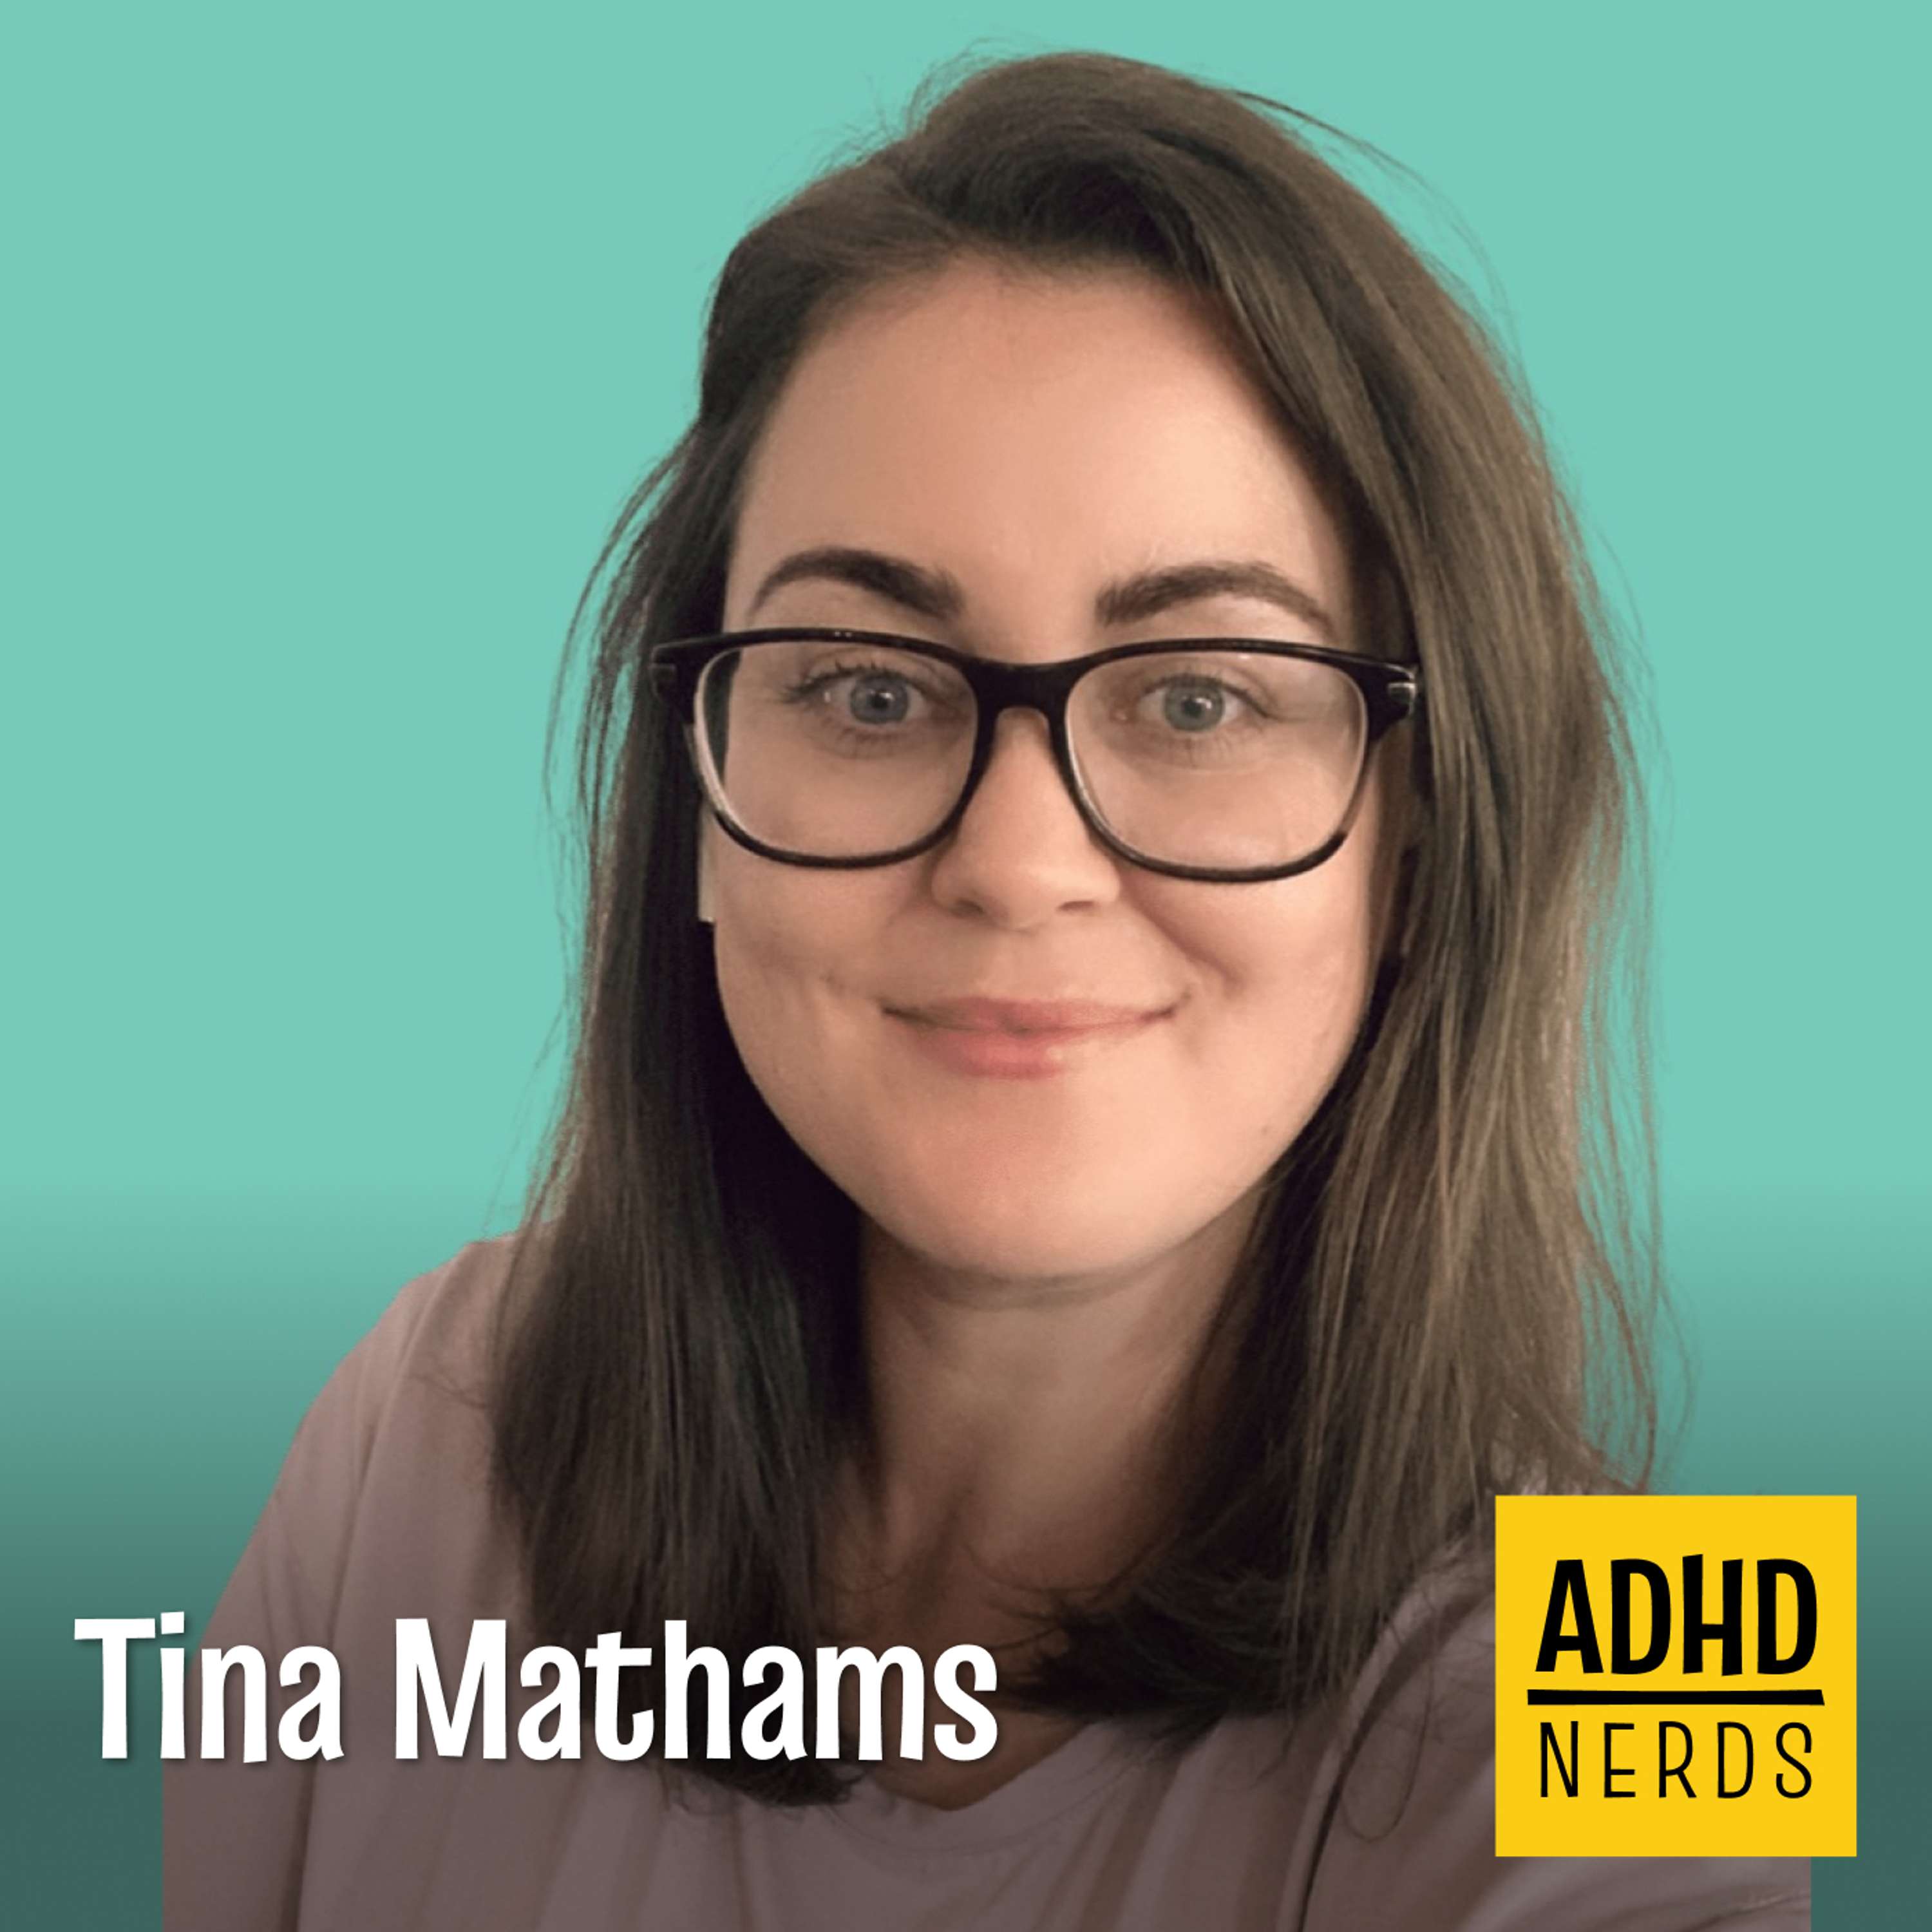 Tina Mathams: Managing Your Budget and Finances with ADHD